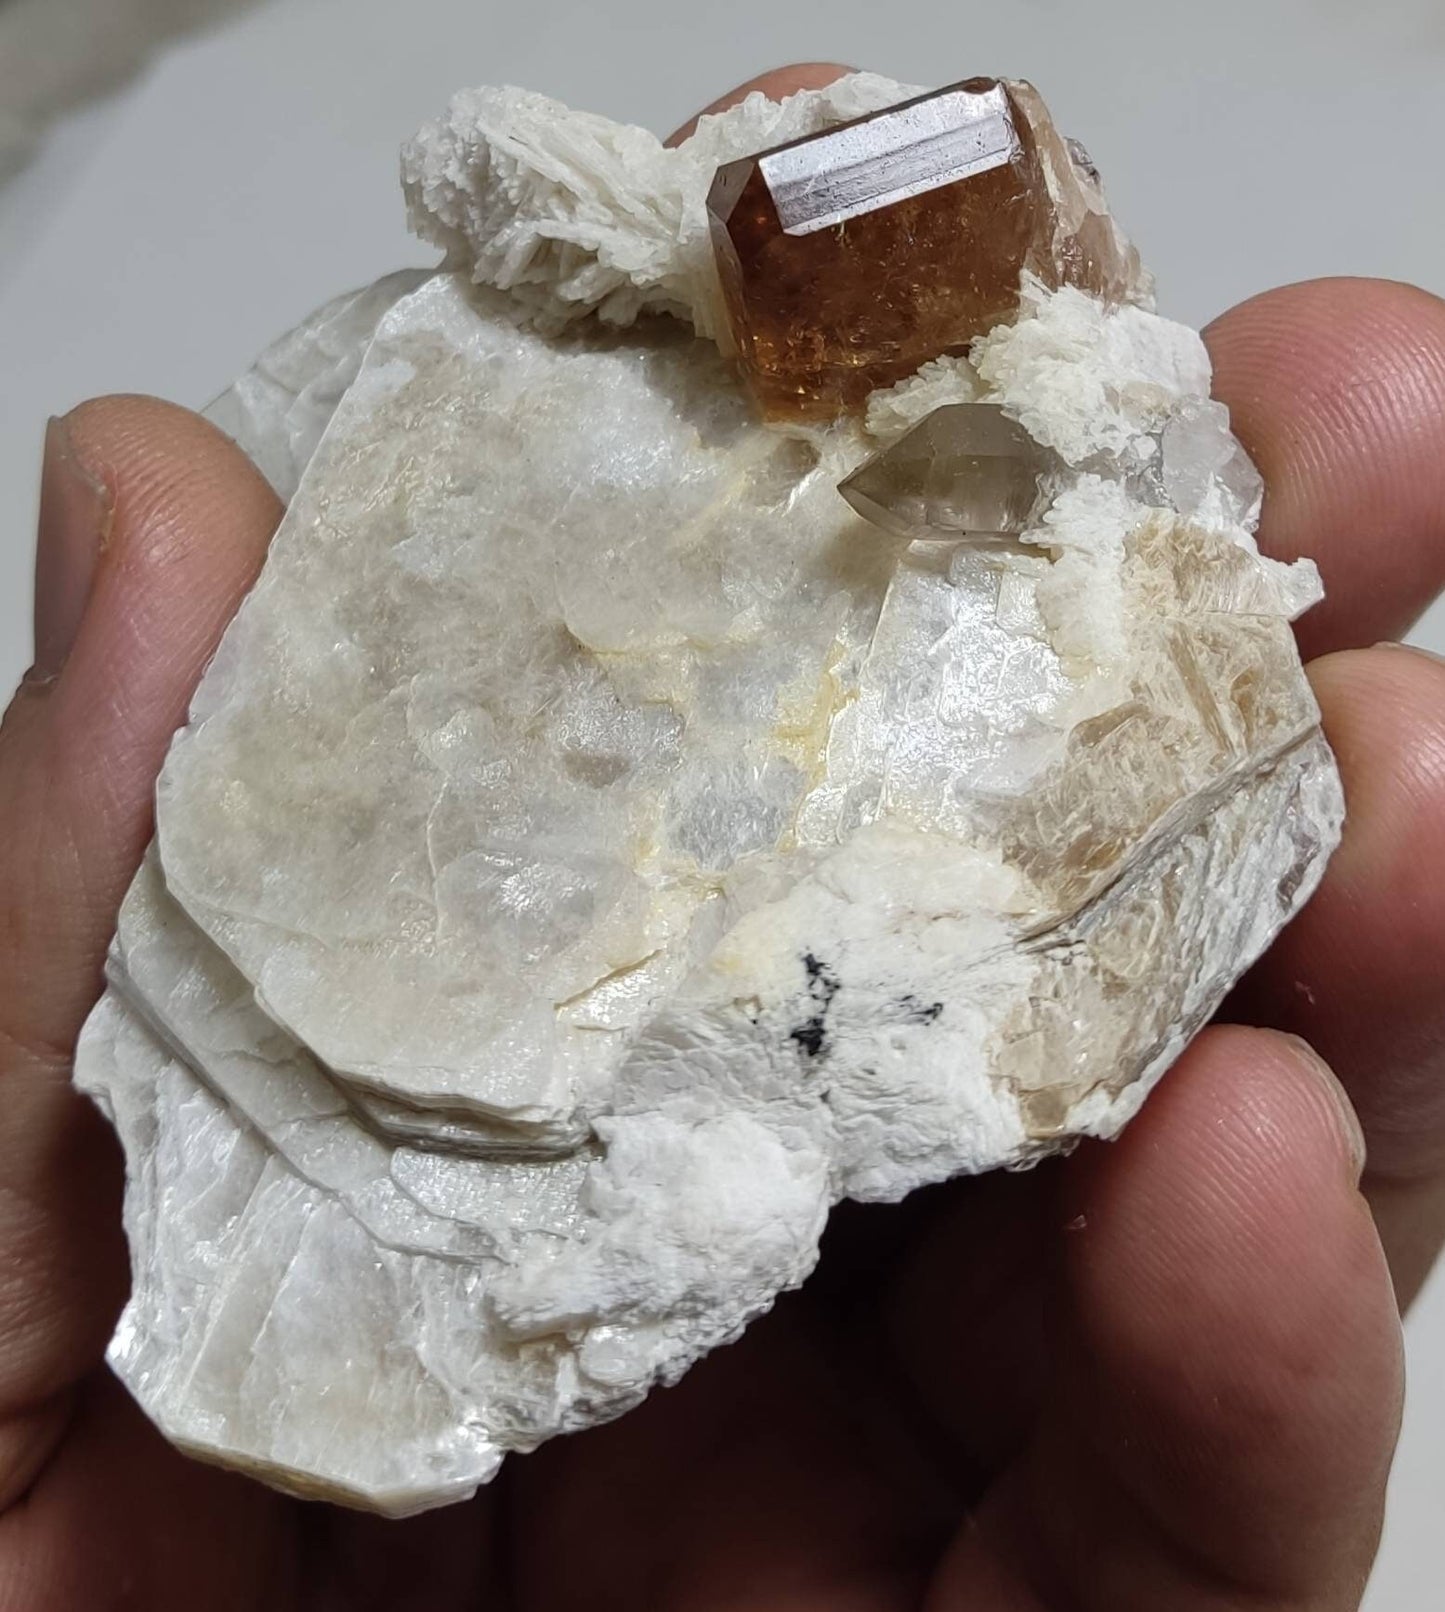 An amazing Specimen of terminated peach color Topaz crystal embedded in muscovite 48 grams